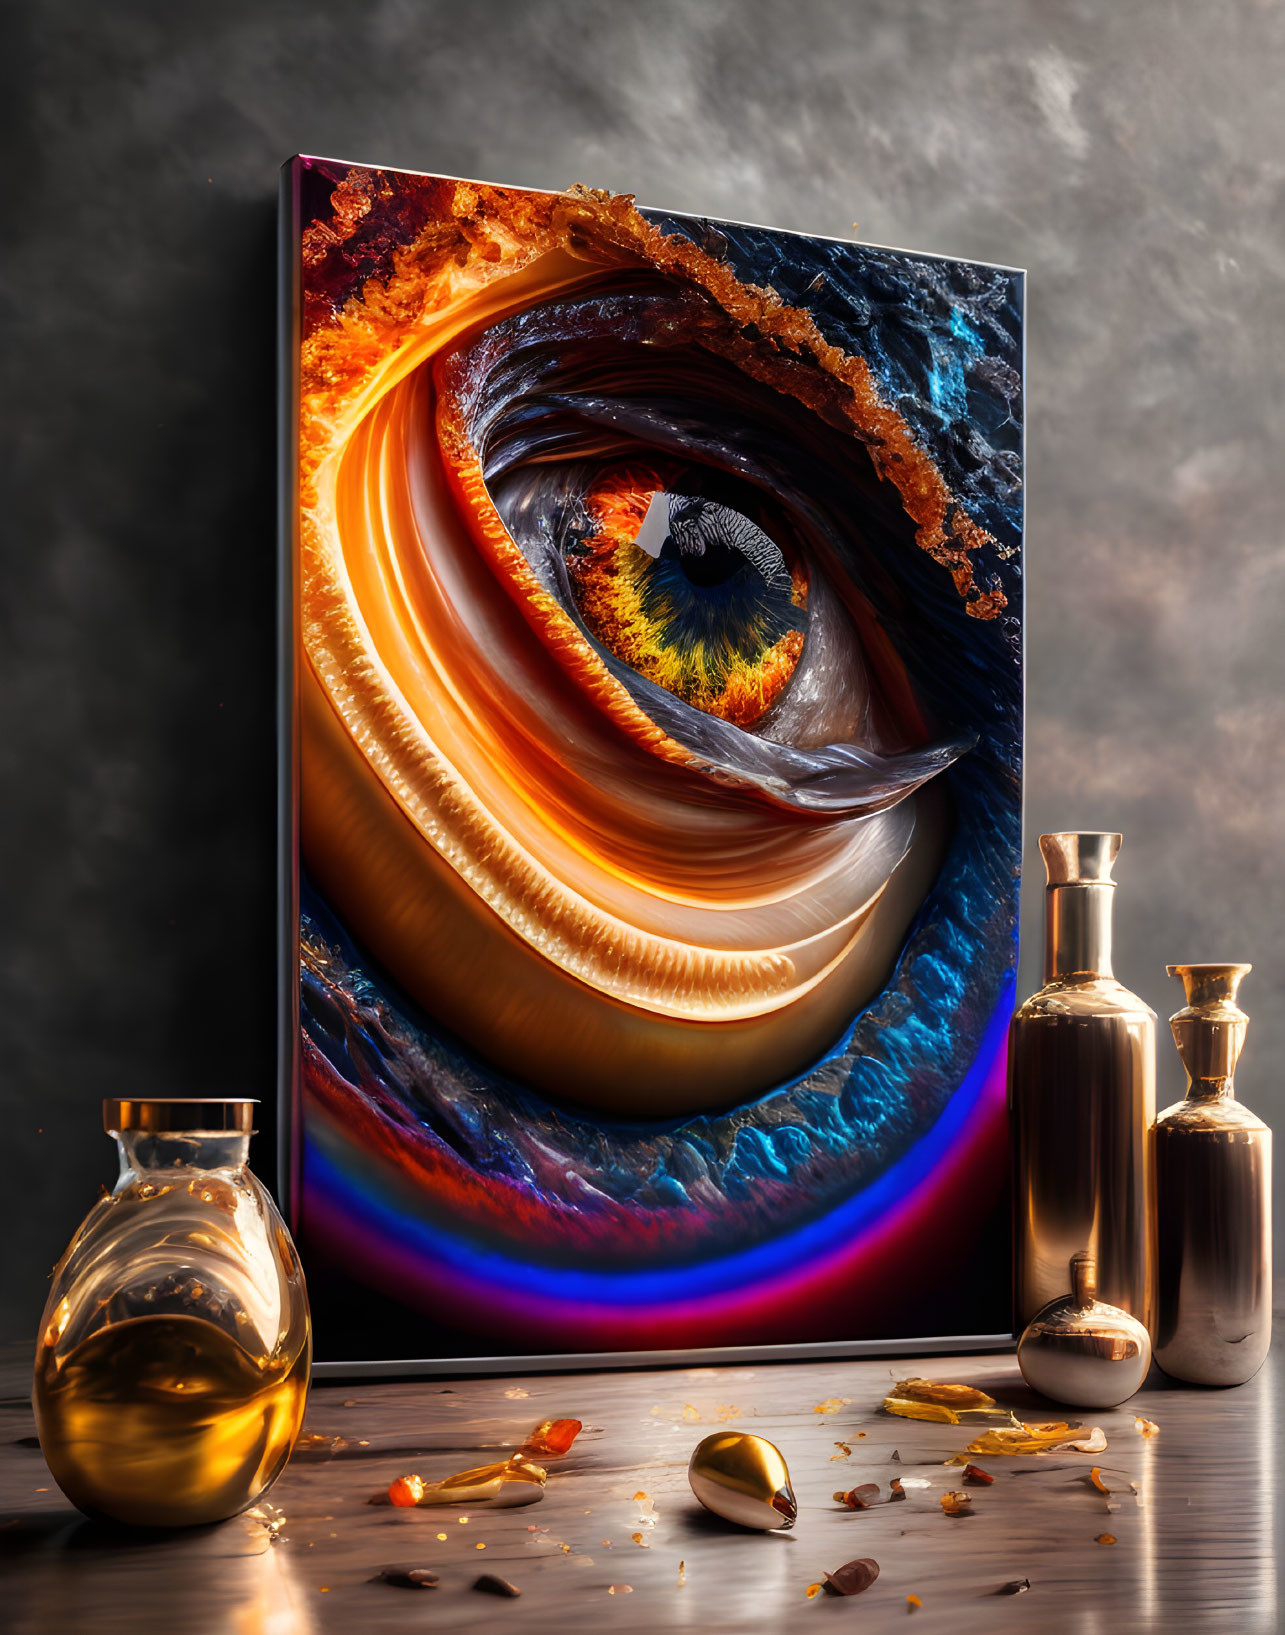 Surreal canvas with fiery eye and golden vases on surface